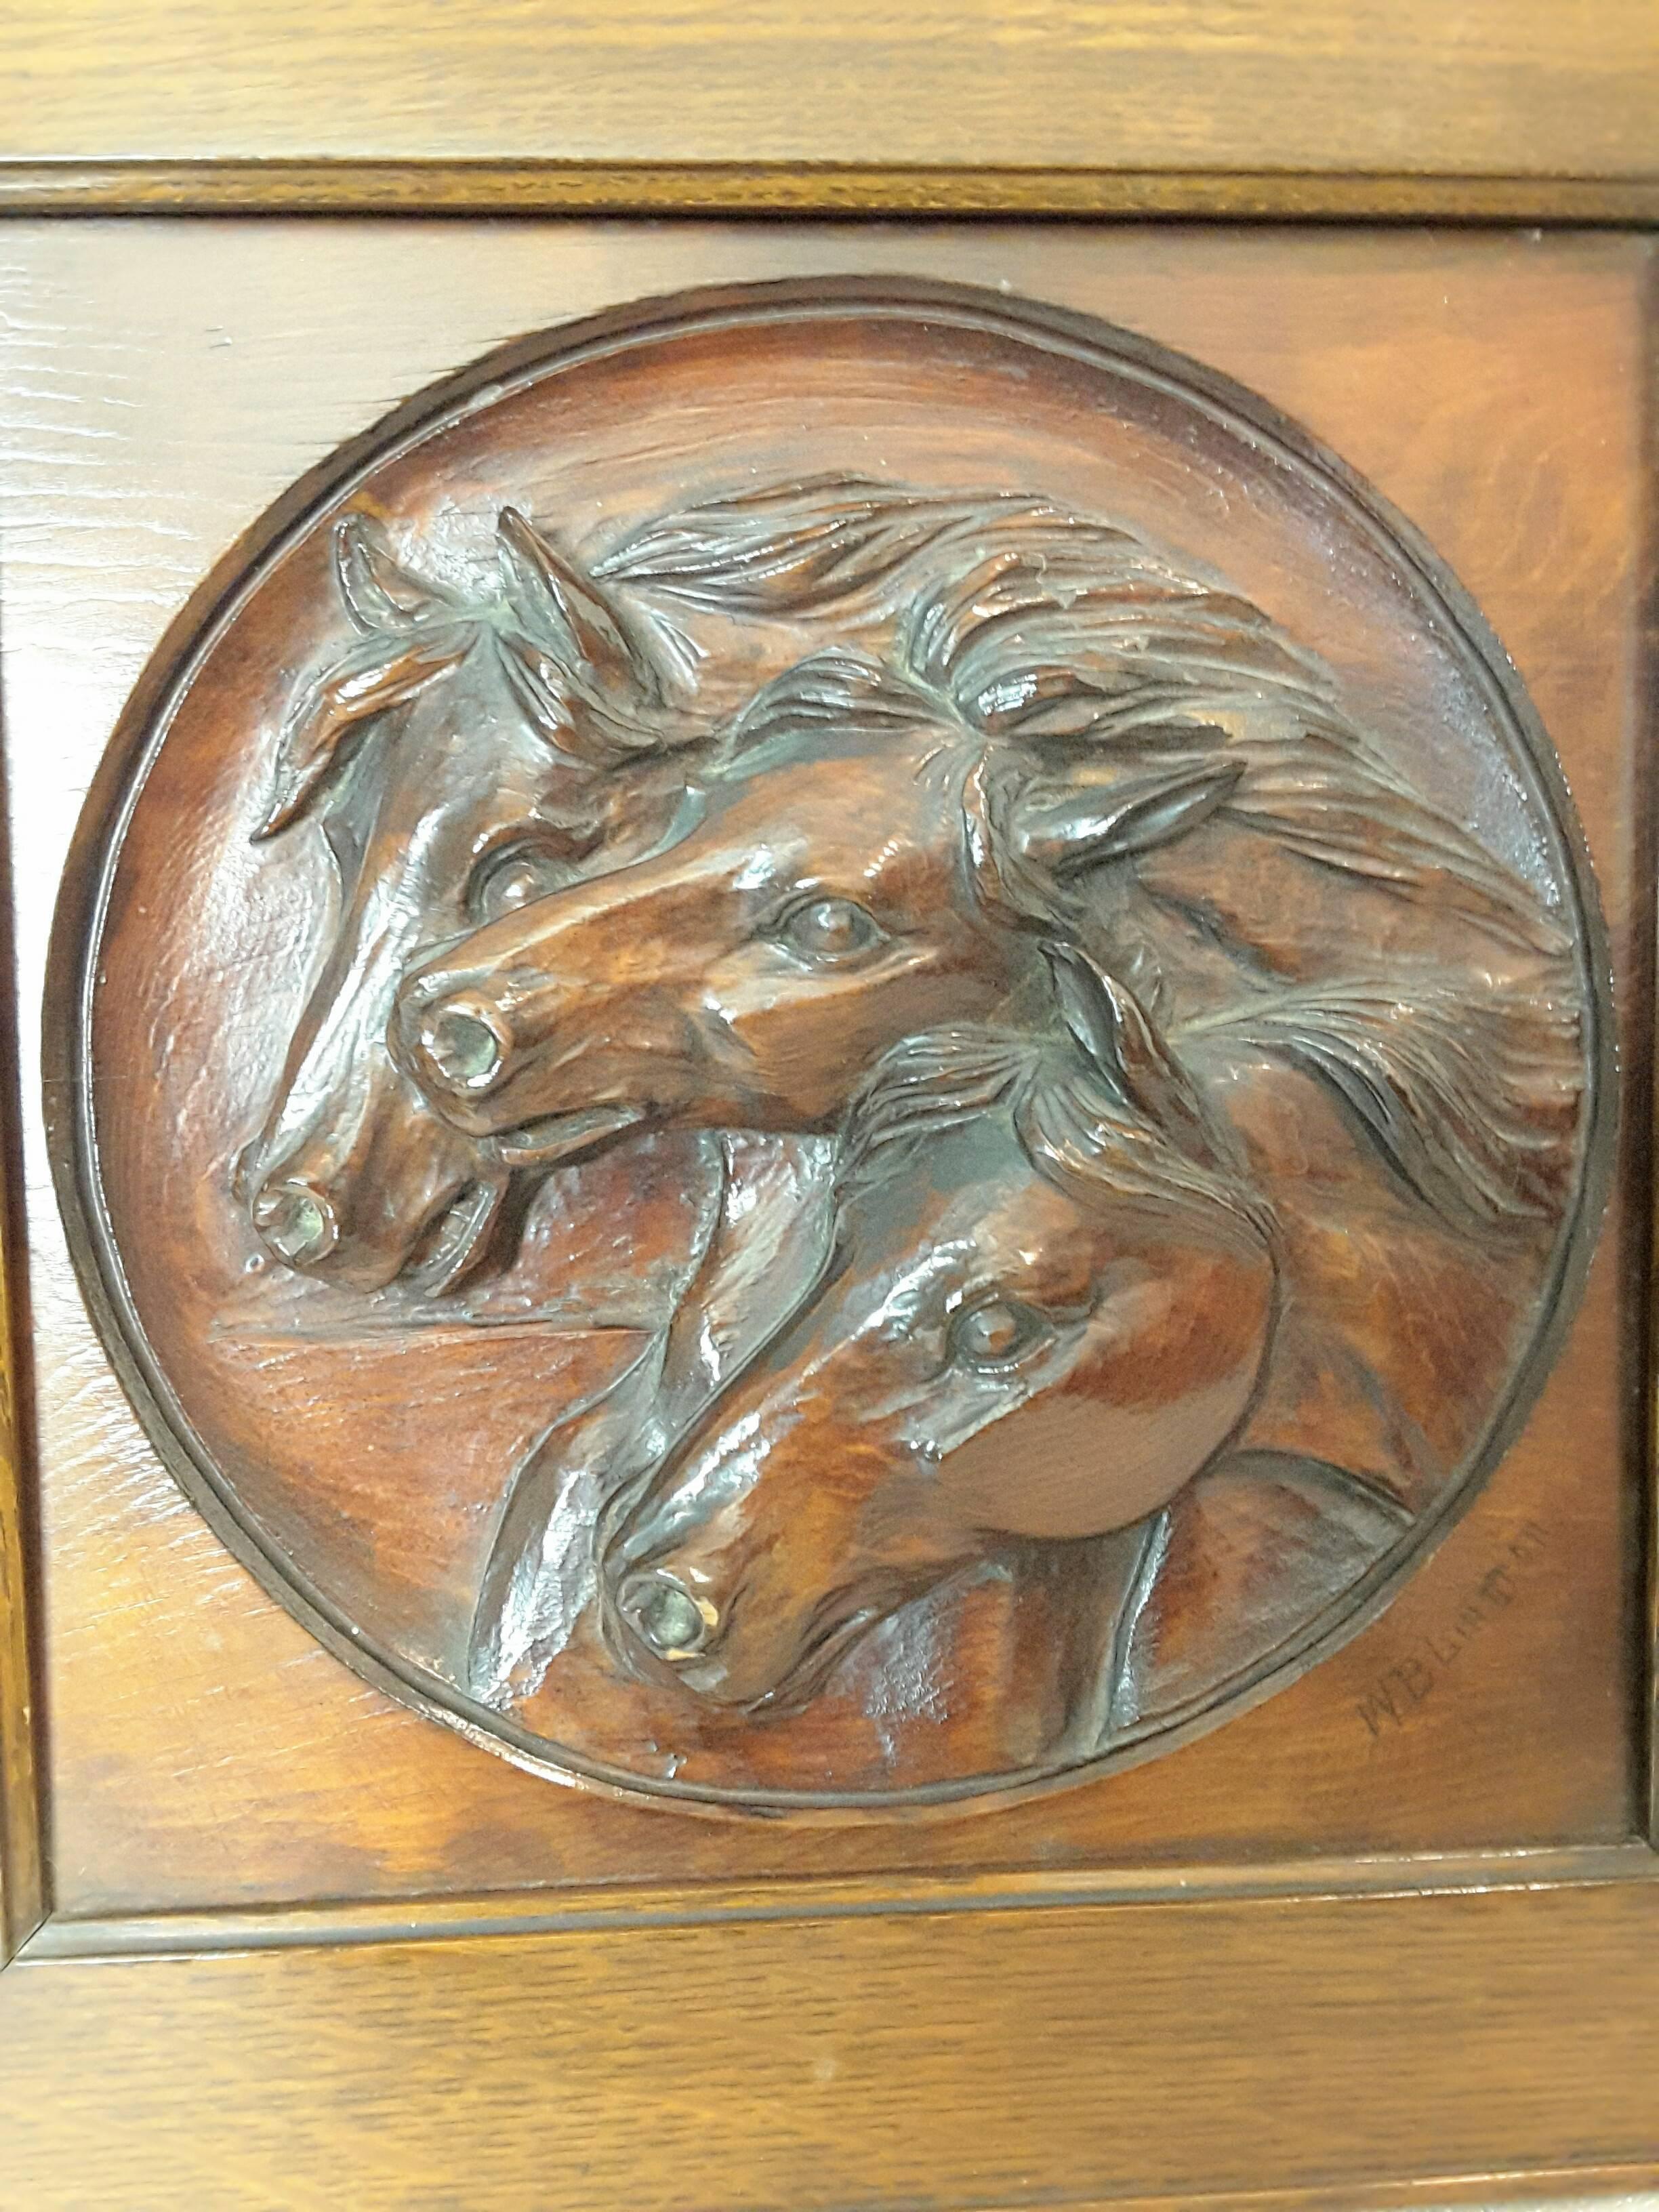 A nice three horse carved pine panel mounted in oak frame signed W.B.Lintton, The horses are deeply carved In a round recessed disc. The carving is signed on the lower right, W. B. Litton. The carving is mounted in a quarter cut oak frame. The